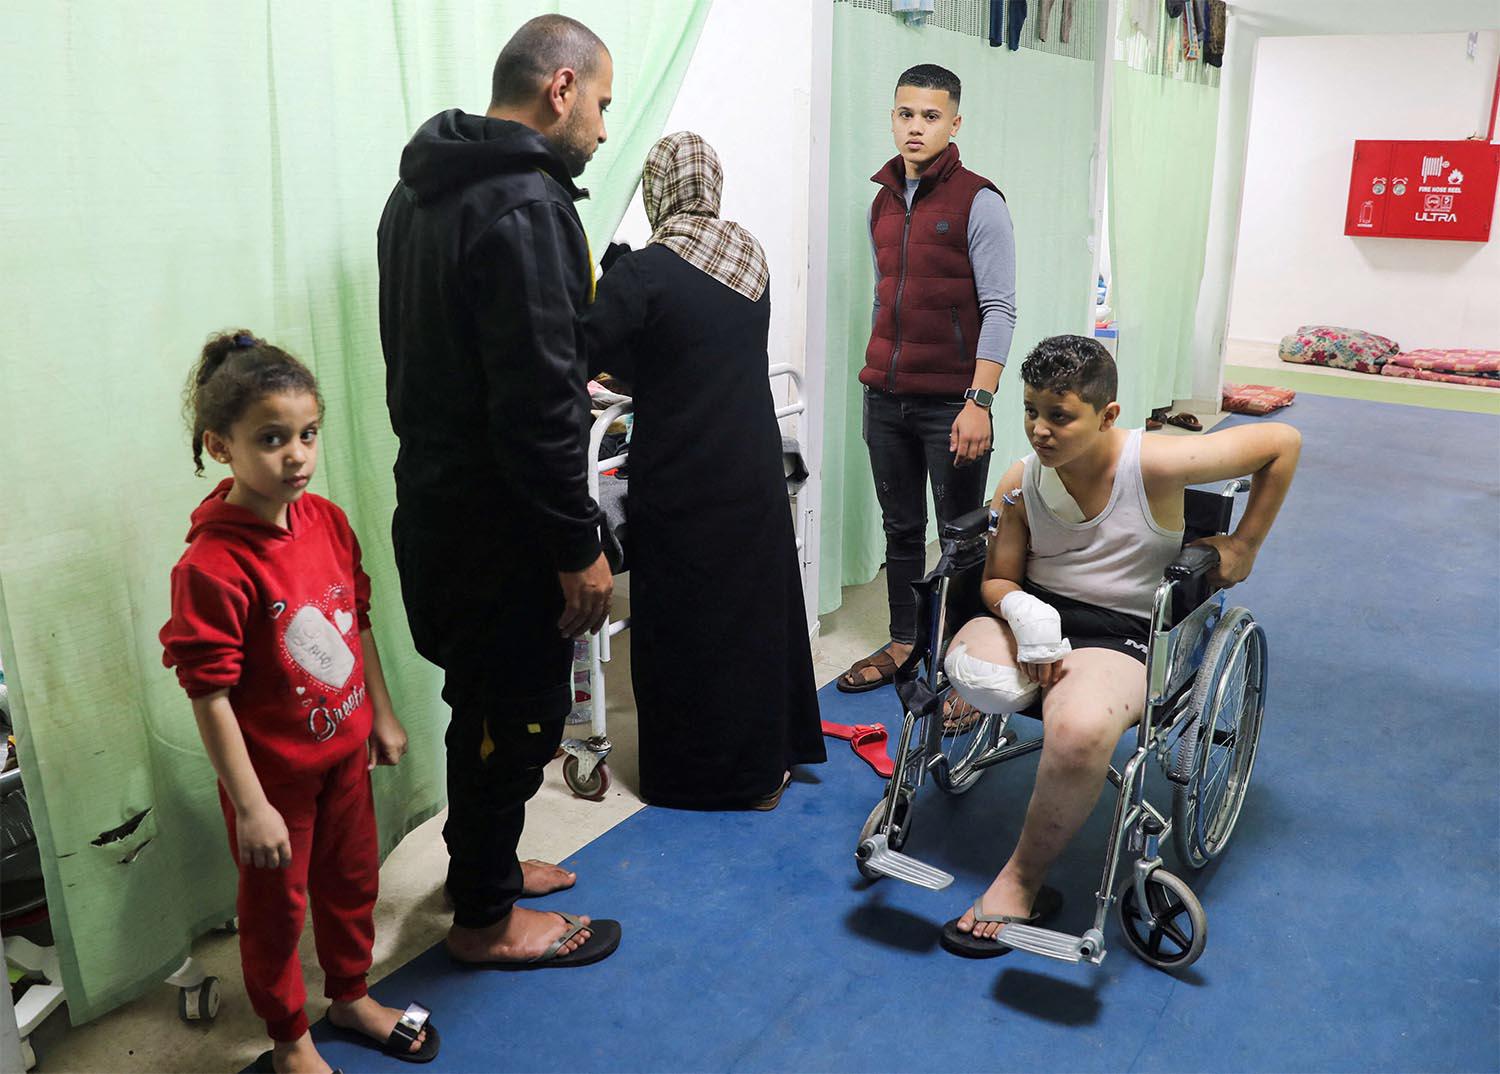 A Palestinian teenager whose limb was amputated after being wounded in an Israeli strike